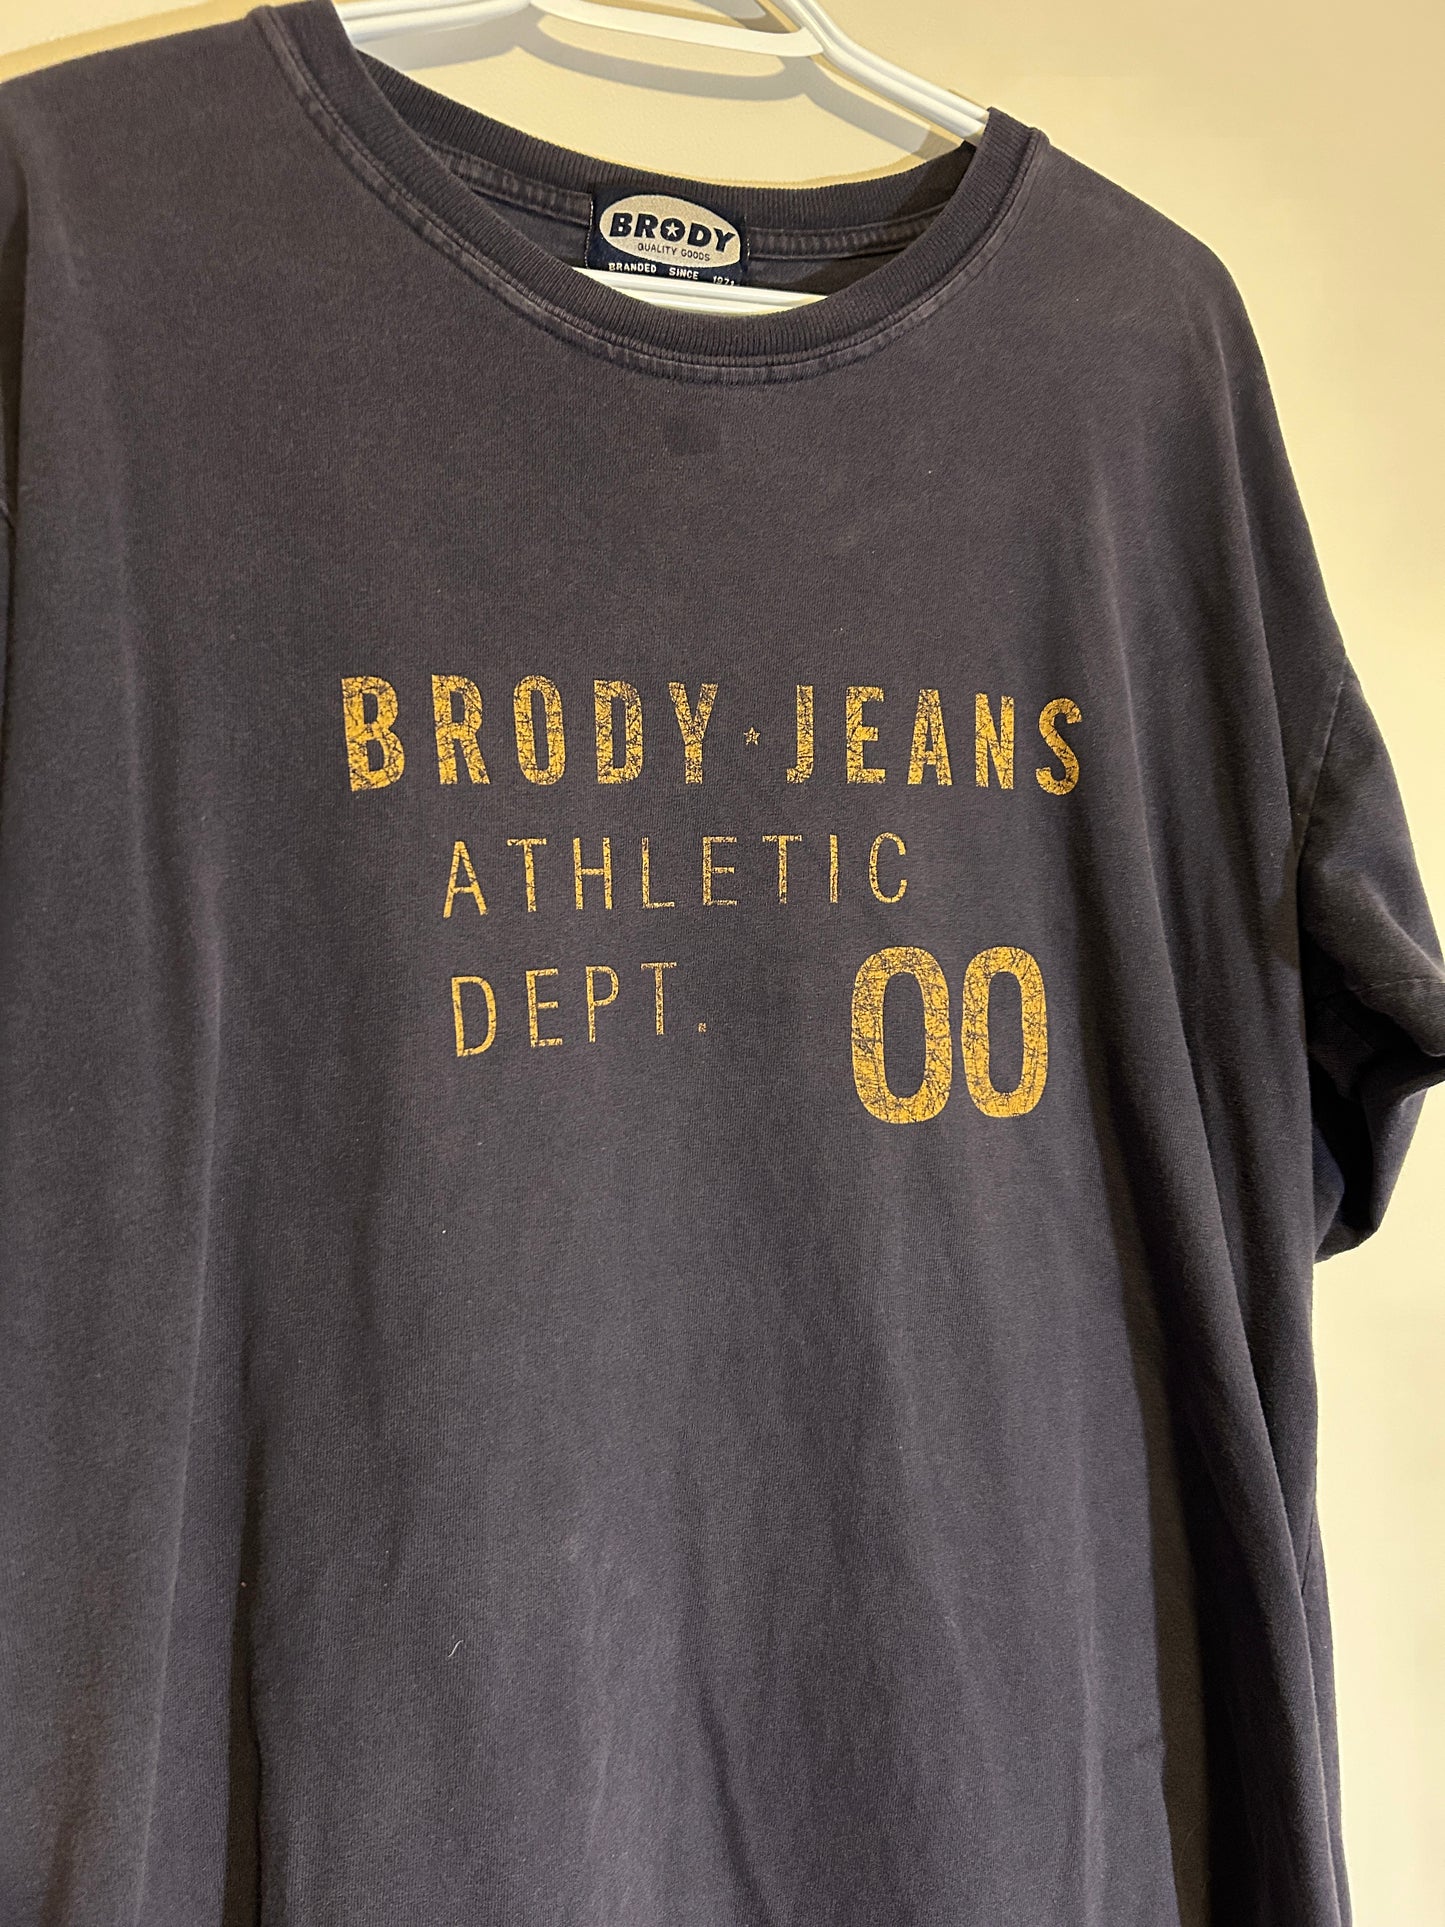 Vintage Faded Brody Jeans Tee (XL)